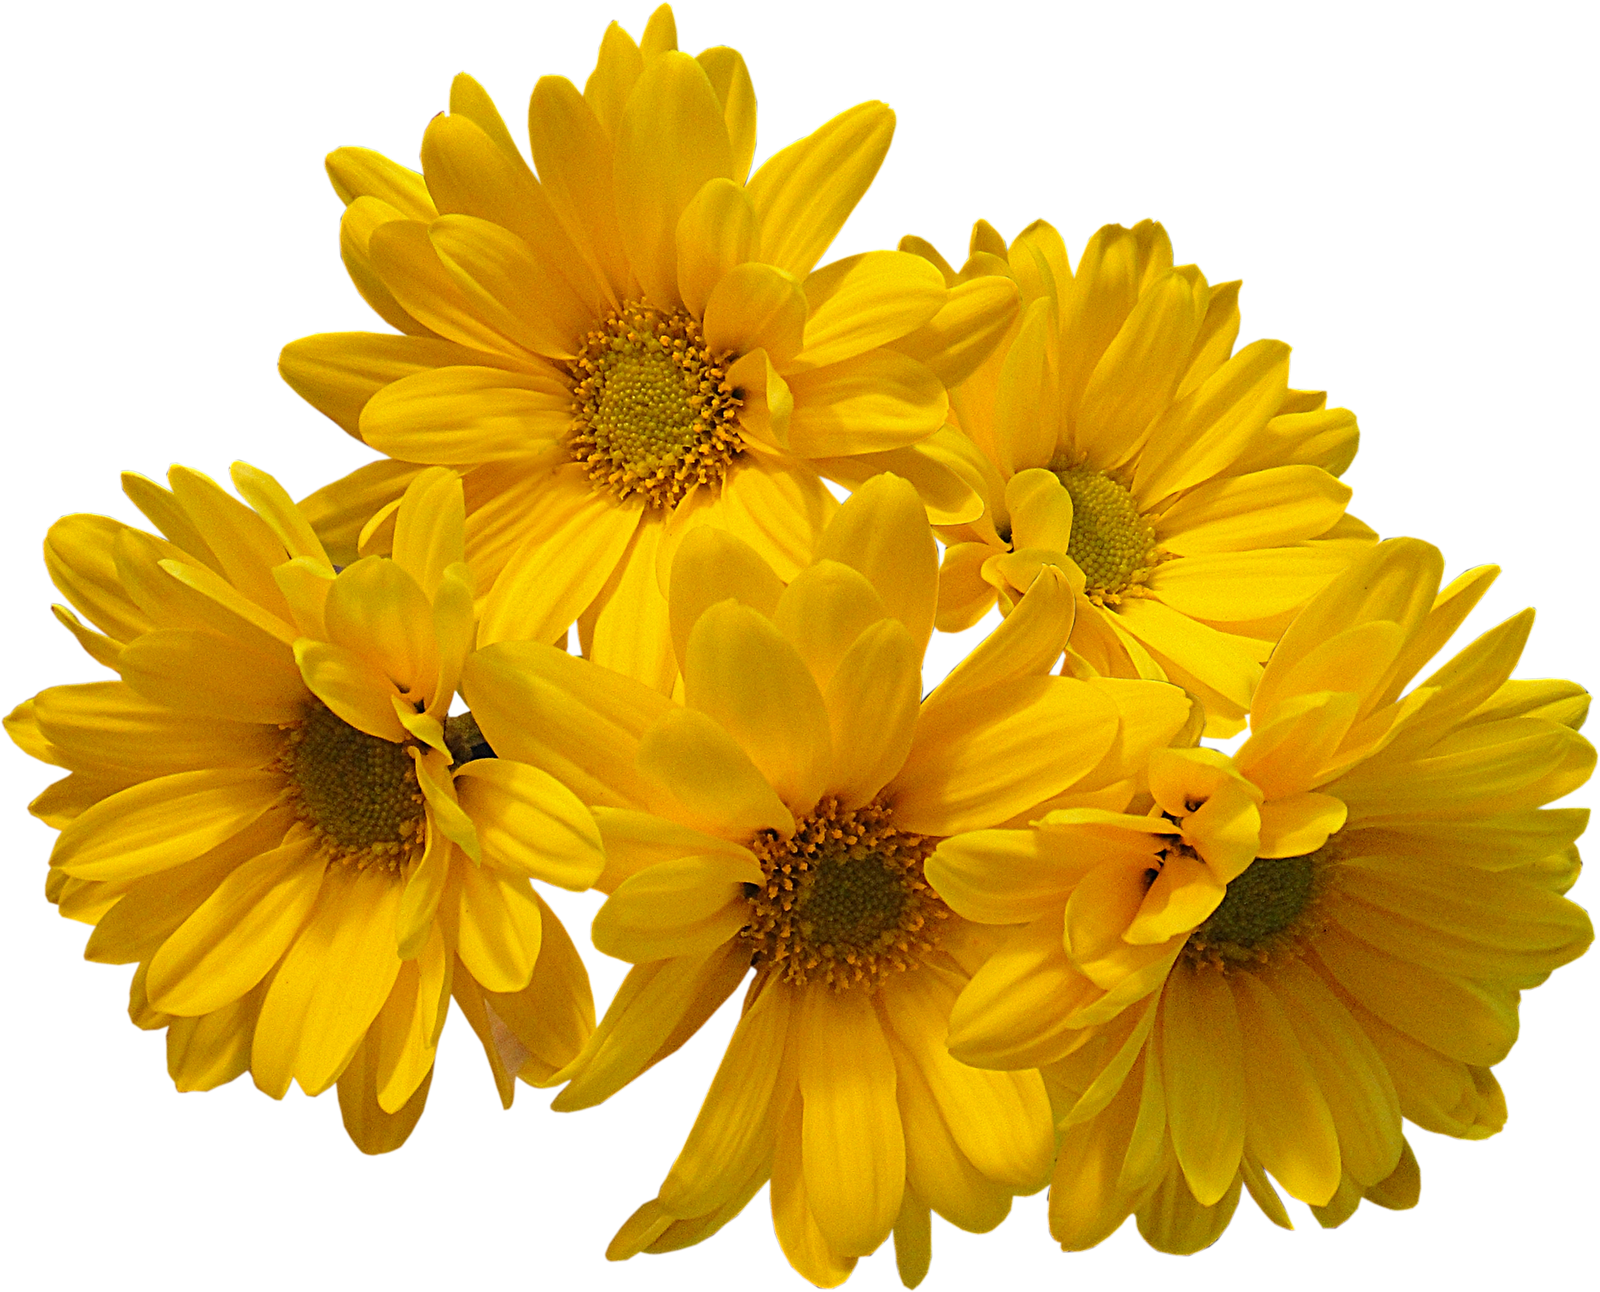 Yellow Flowers Bouquet Transparent Image PNG Image